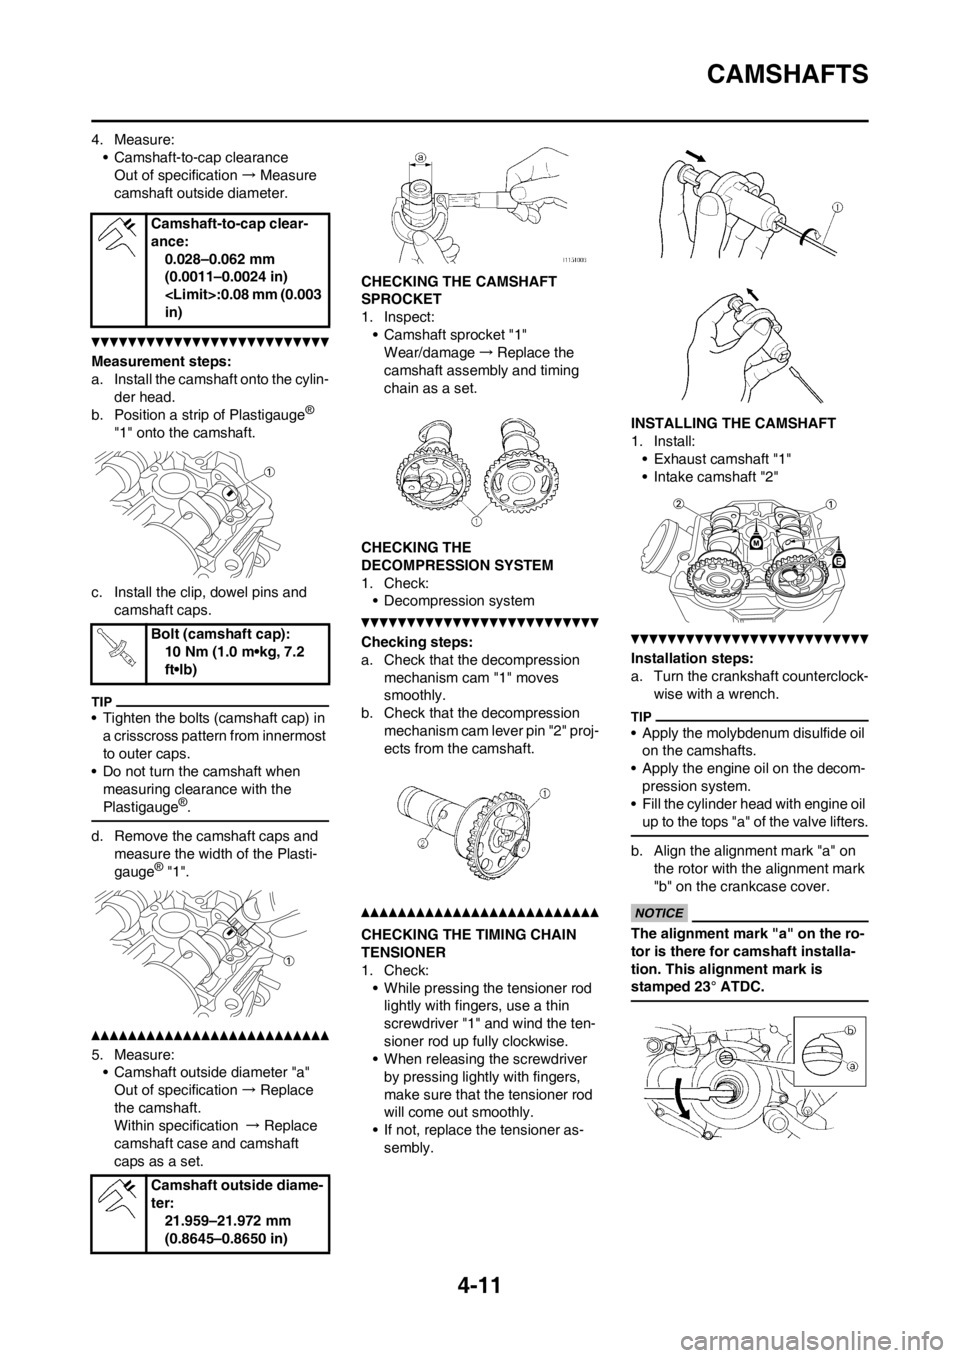 YAMAHA YZ450F 2012  Owners Manual 4-11
CAMSHAFTS
4. Measure:
• Camshaft-to-cap clearance
Out of specification → Measure 
camshaft outside diameter.
Measurement steps:
a. Install the camshaft onto the cylin-
der head.
b. Position a